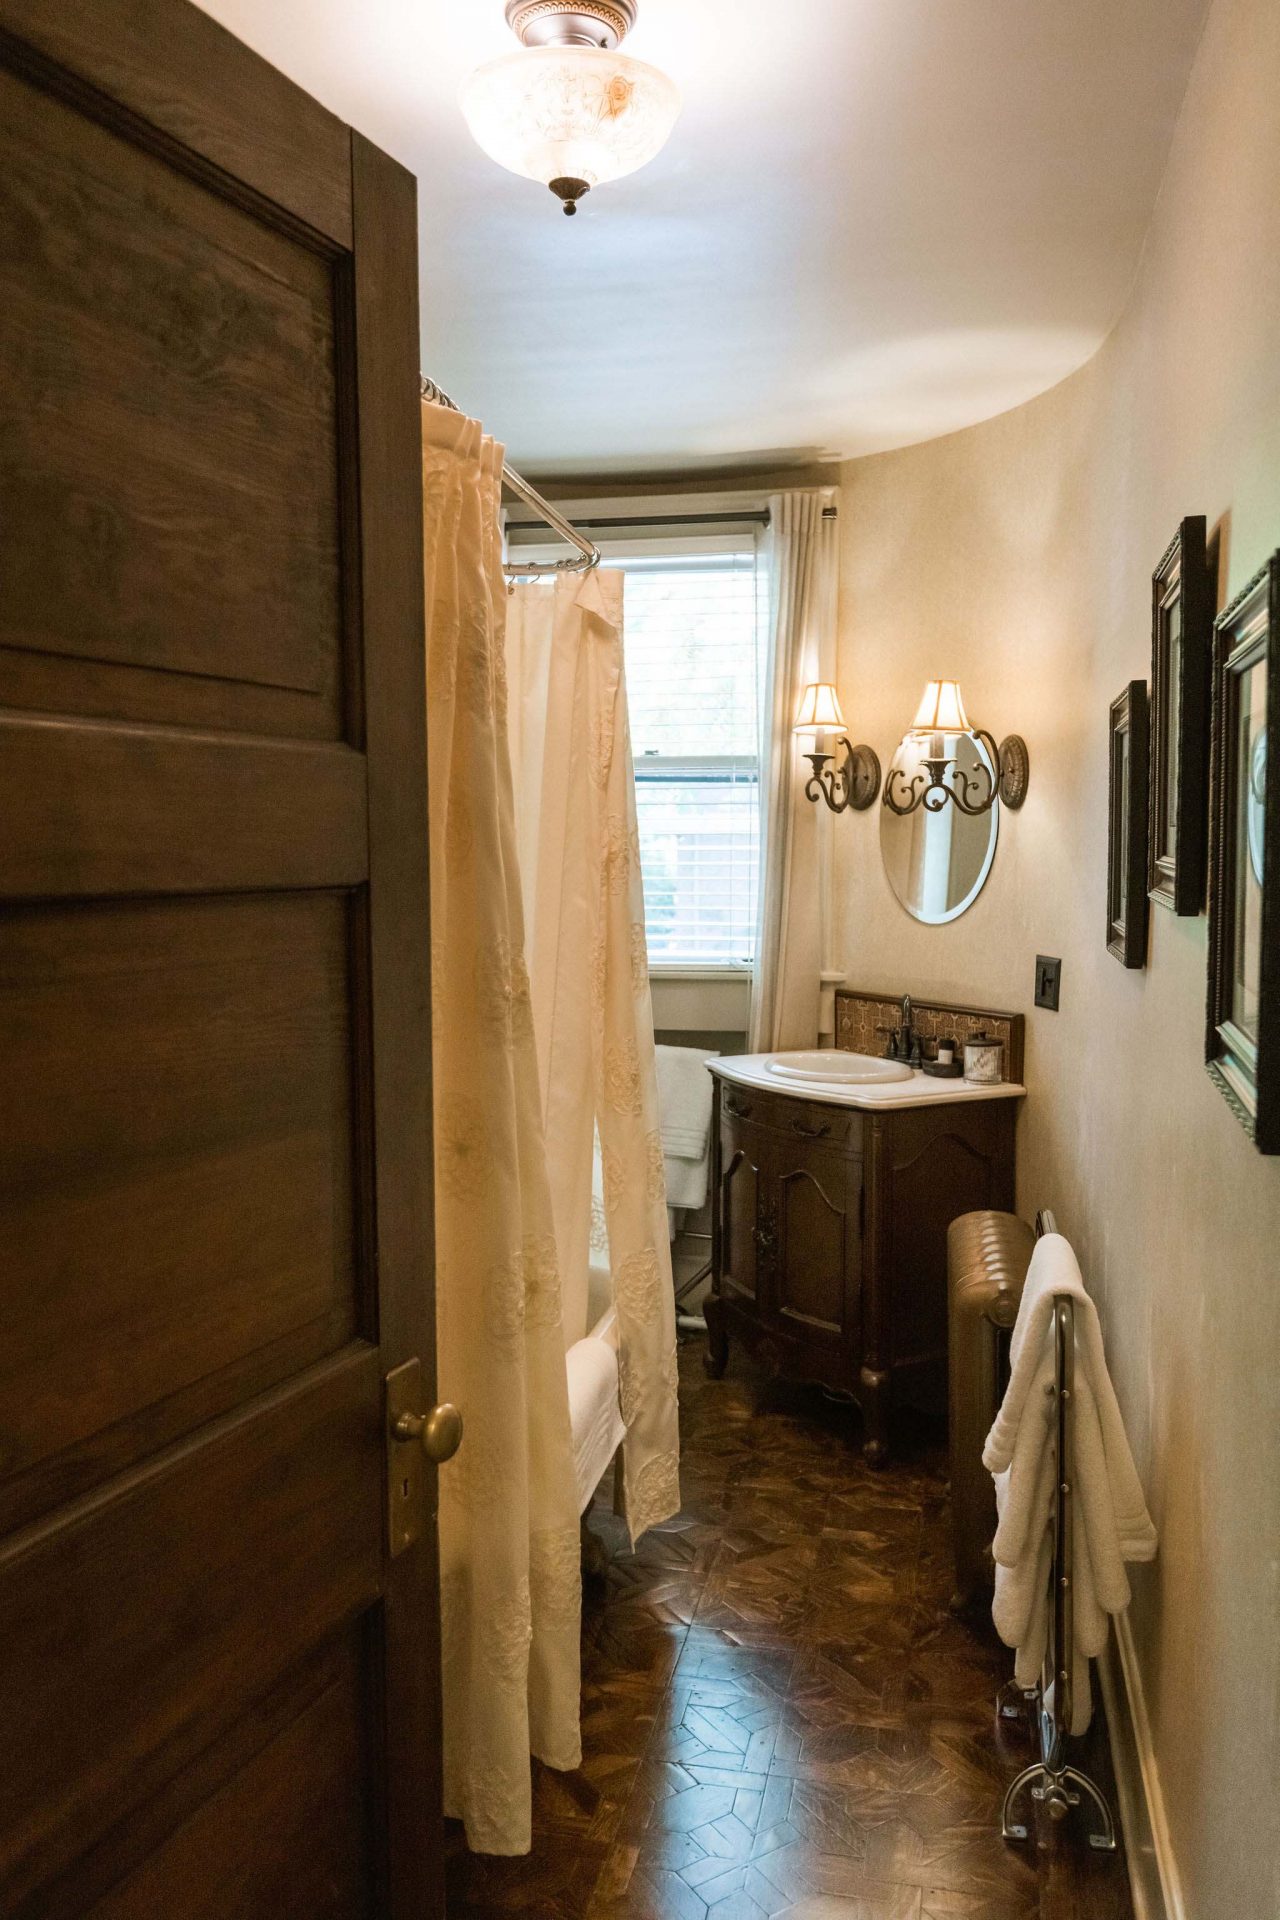 A bathroom with a claw foot tub with shower above and a creamy curtain, sink in a dark wood dresser, a mirror, and several paintings hanging over the walls.